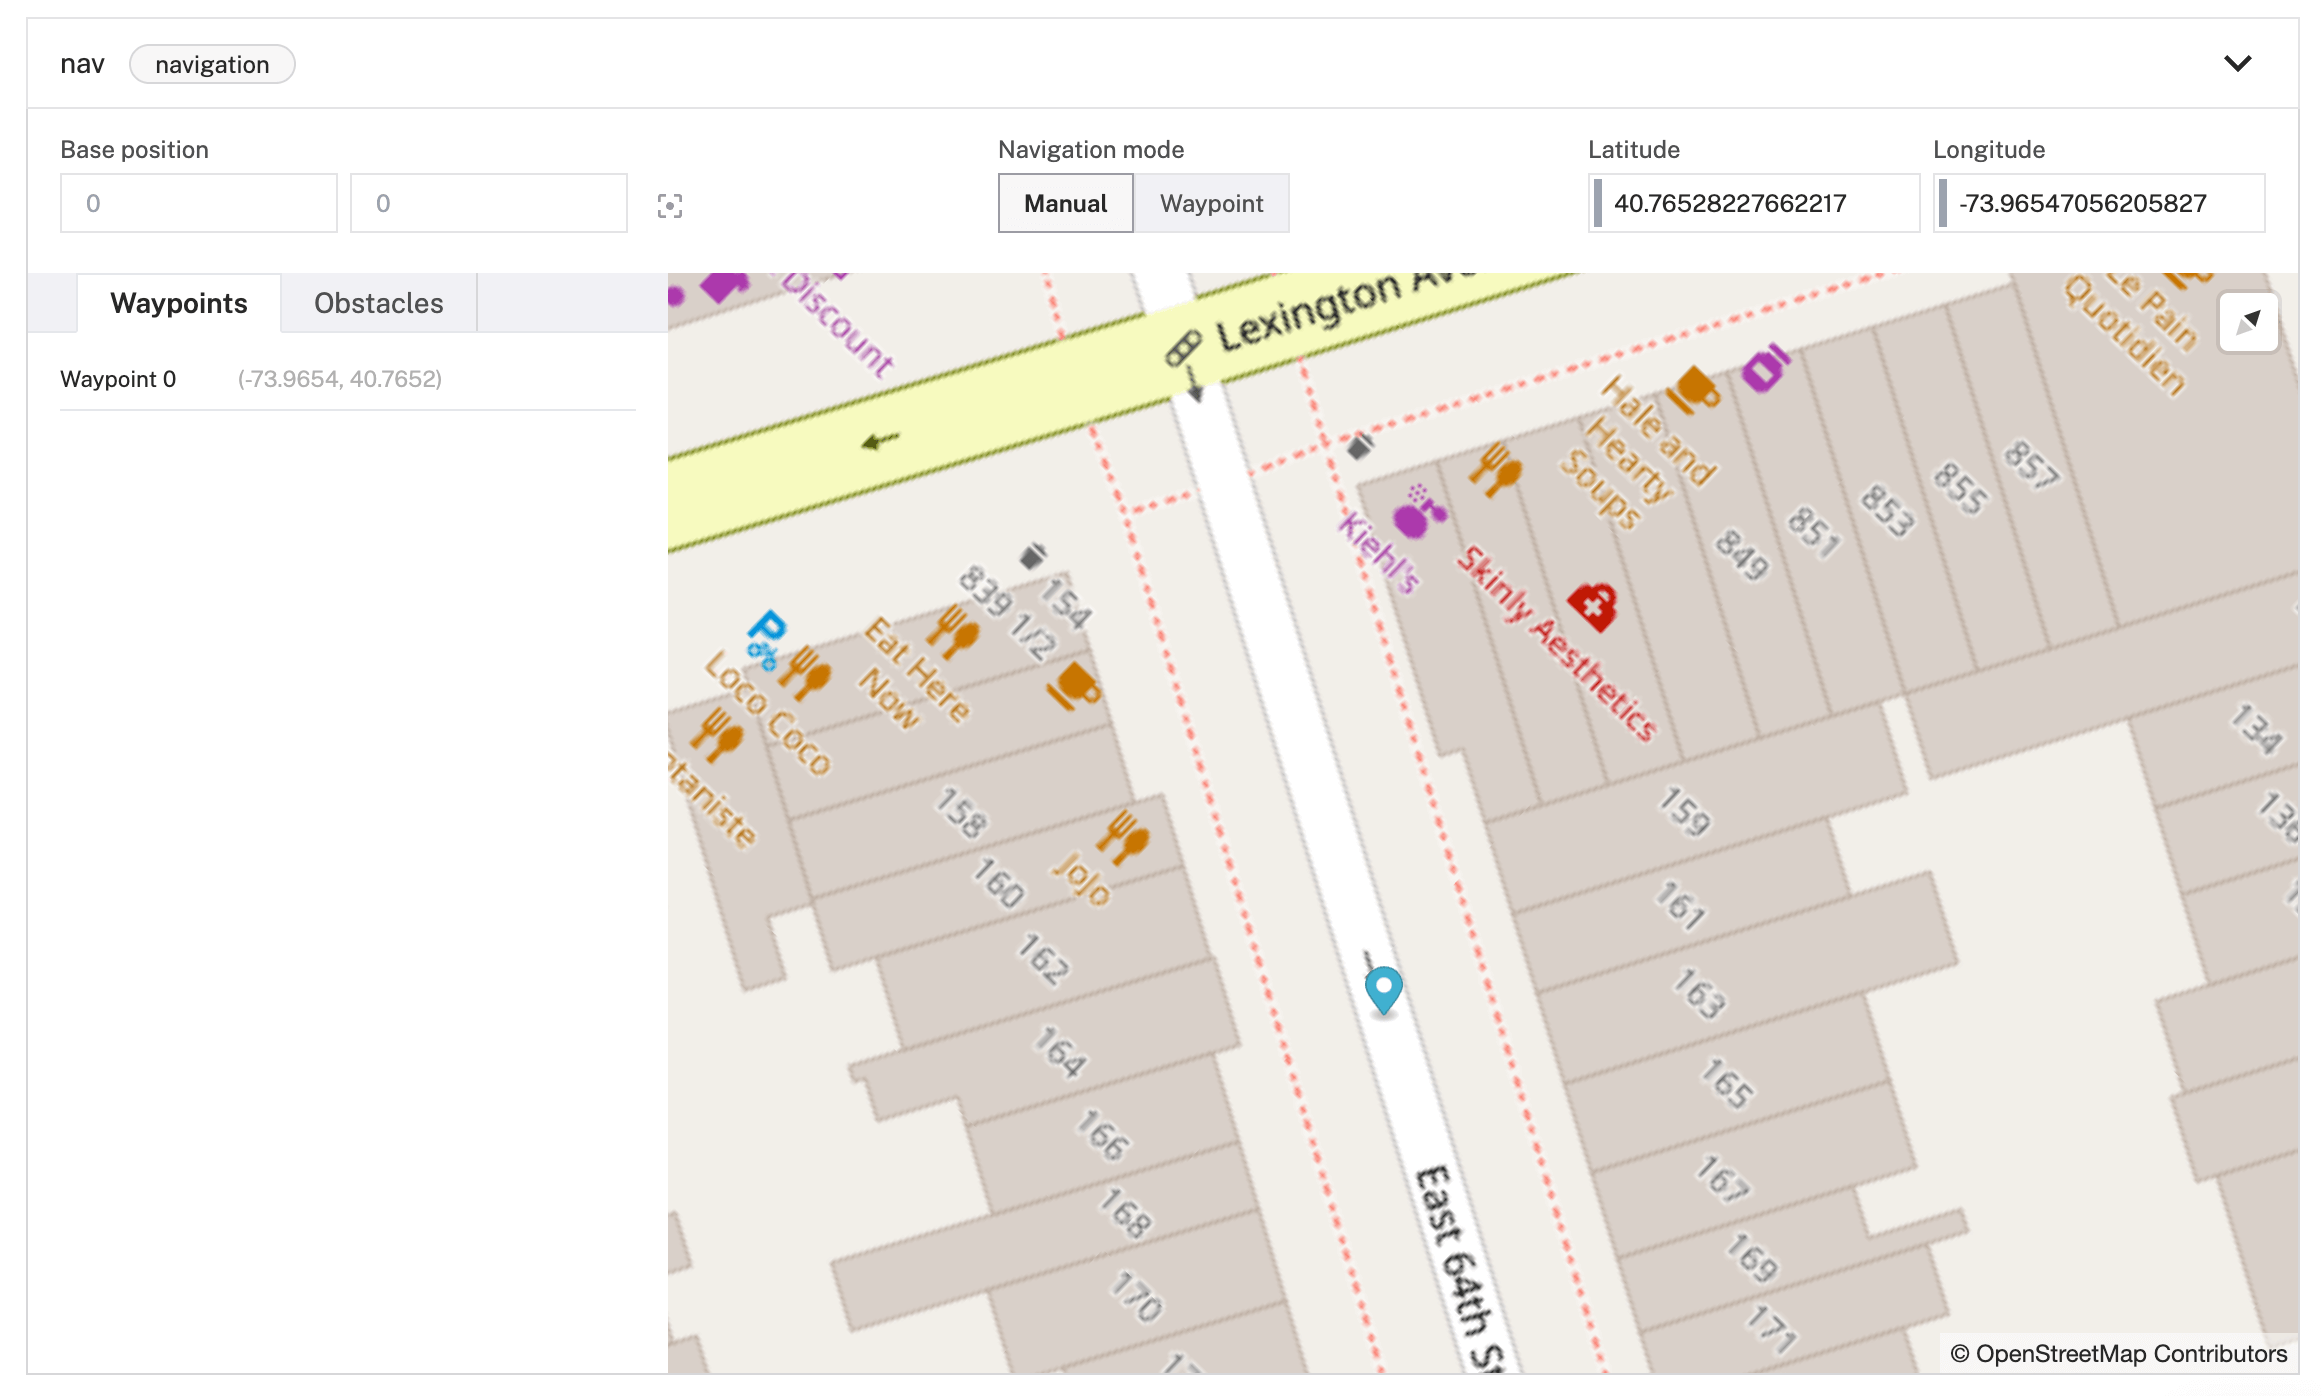 Waypoint 0 being added in the Viam app config builder on a New York City street